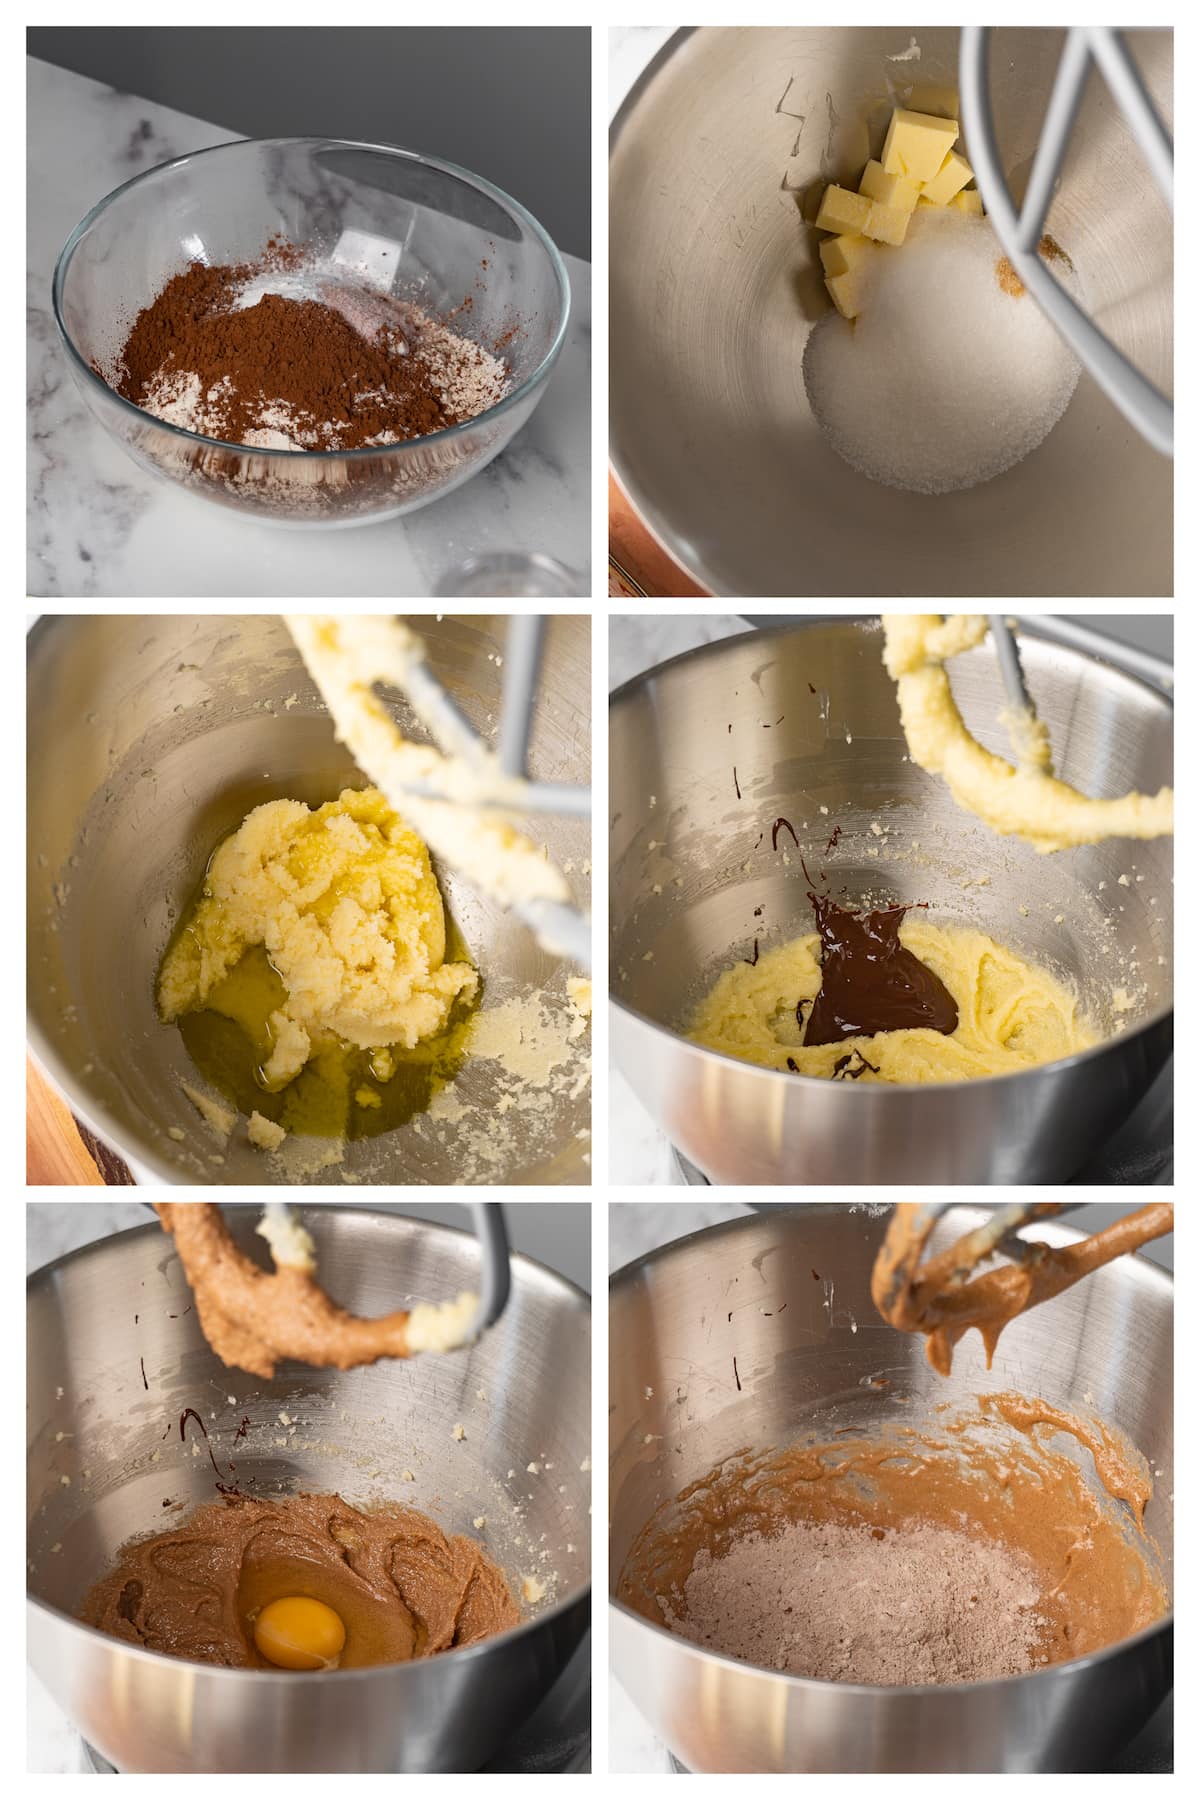 The collage image shows six steps to make the chocolate cake batter.